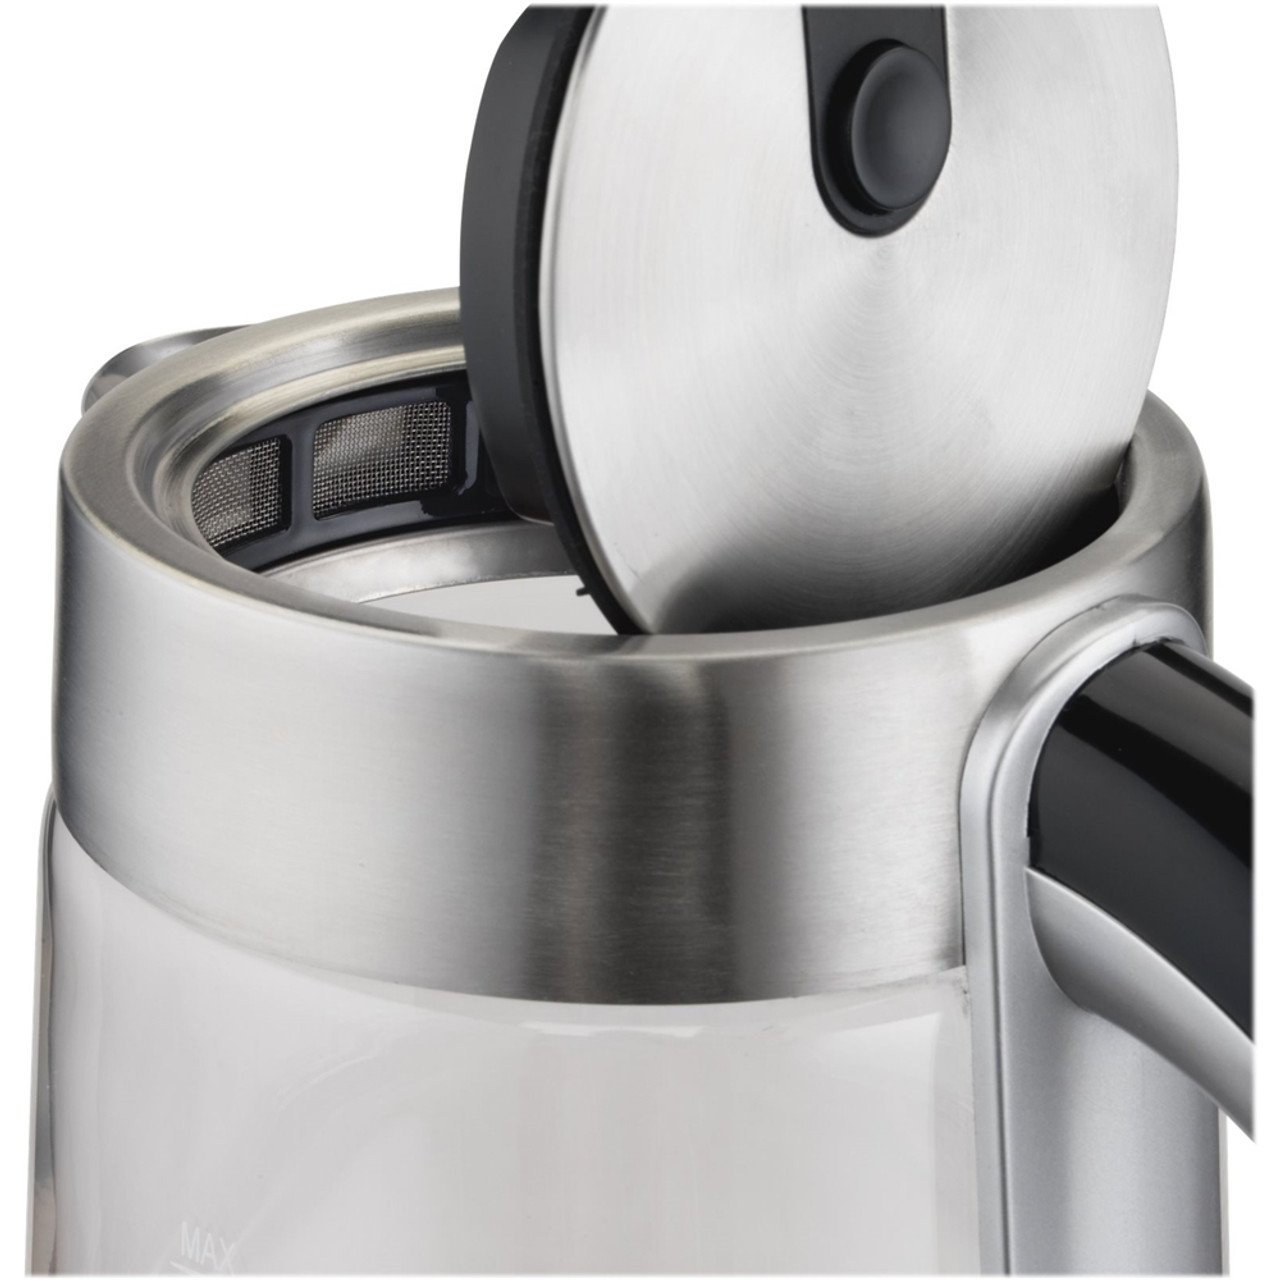 Hamilton Beach - 1.7L Electric Kettle - Stainless Steel